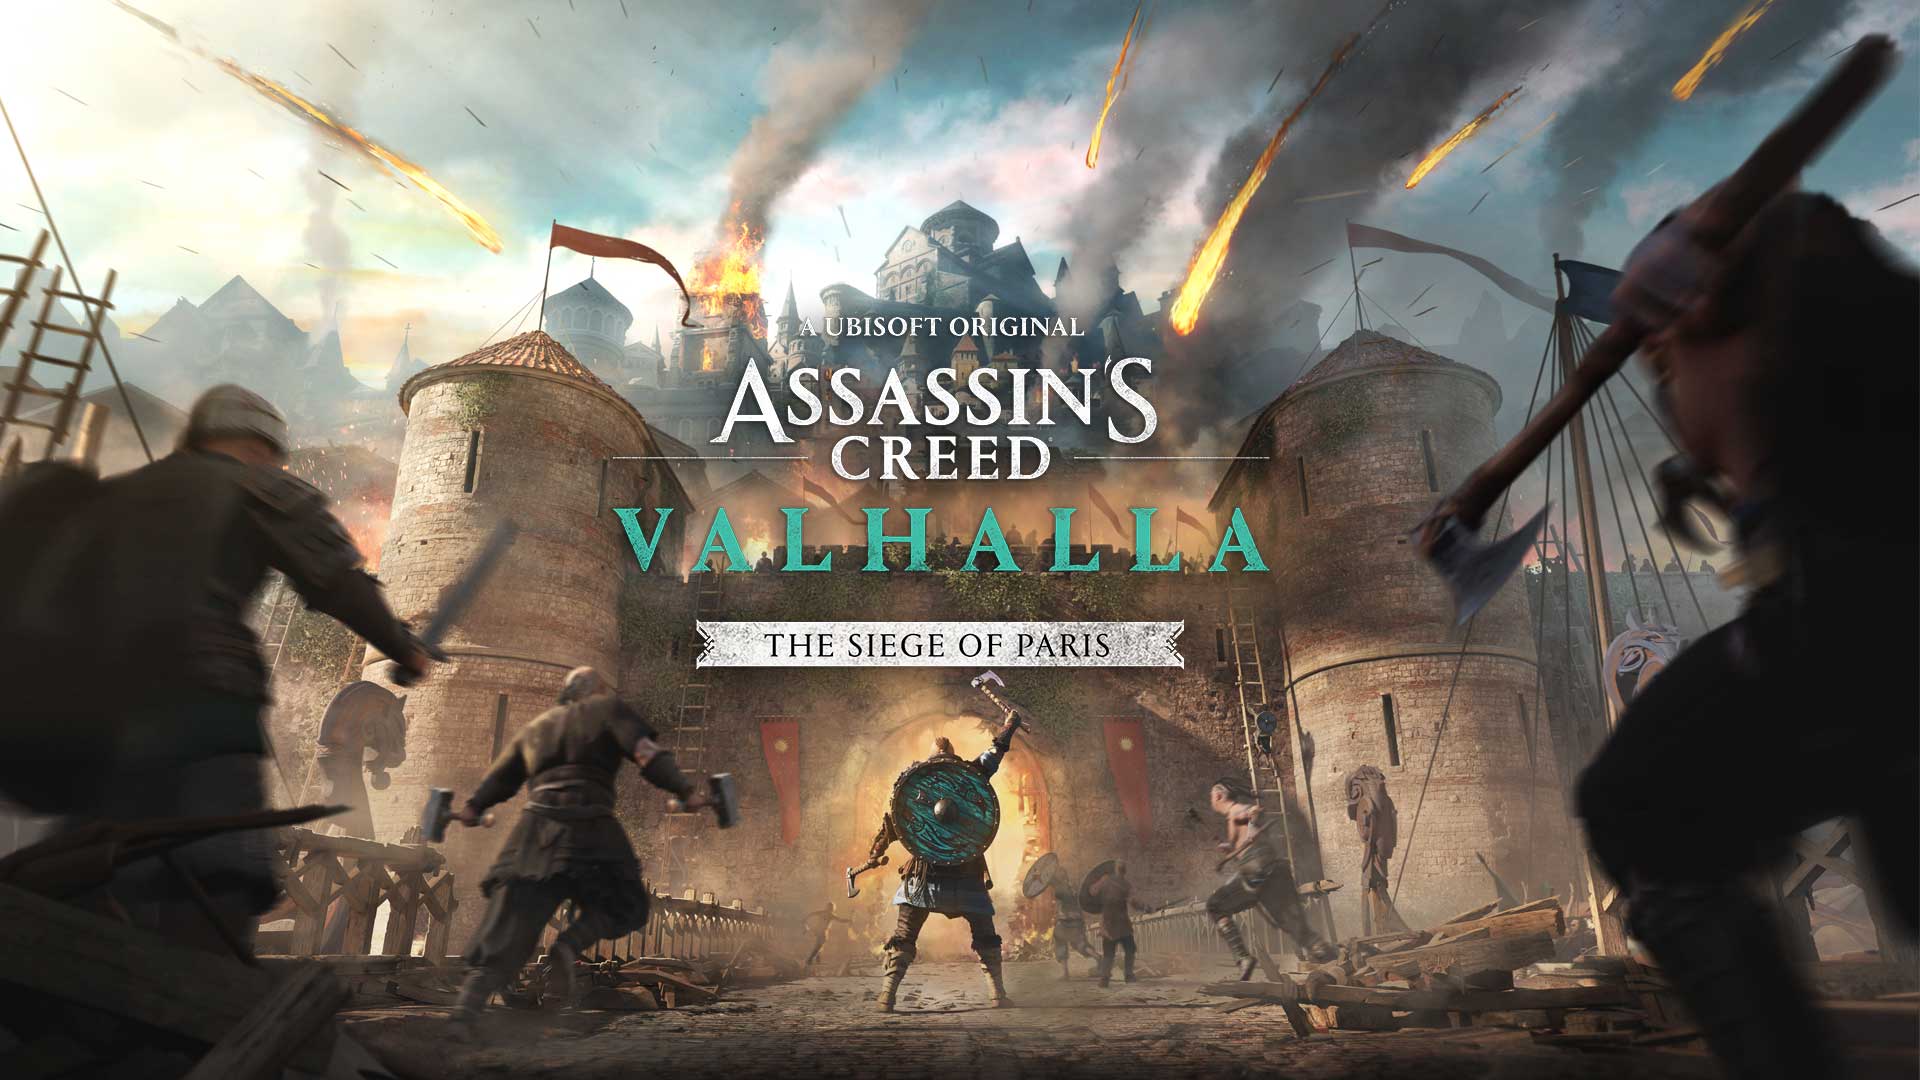 Assassin’s Creed Valhalla Siege of Paris Revealed and Third Expansion Teased